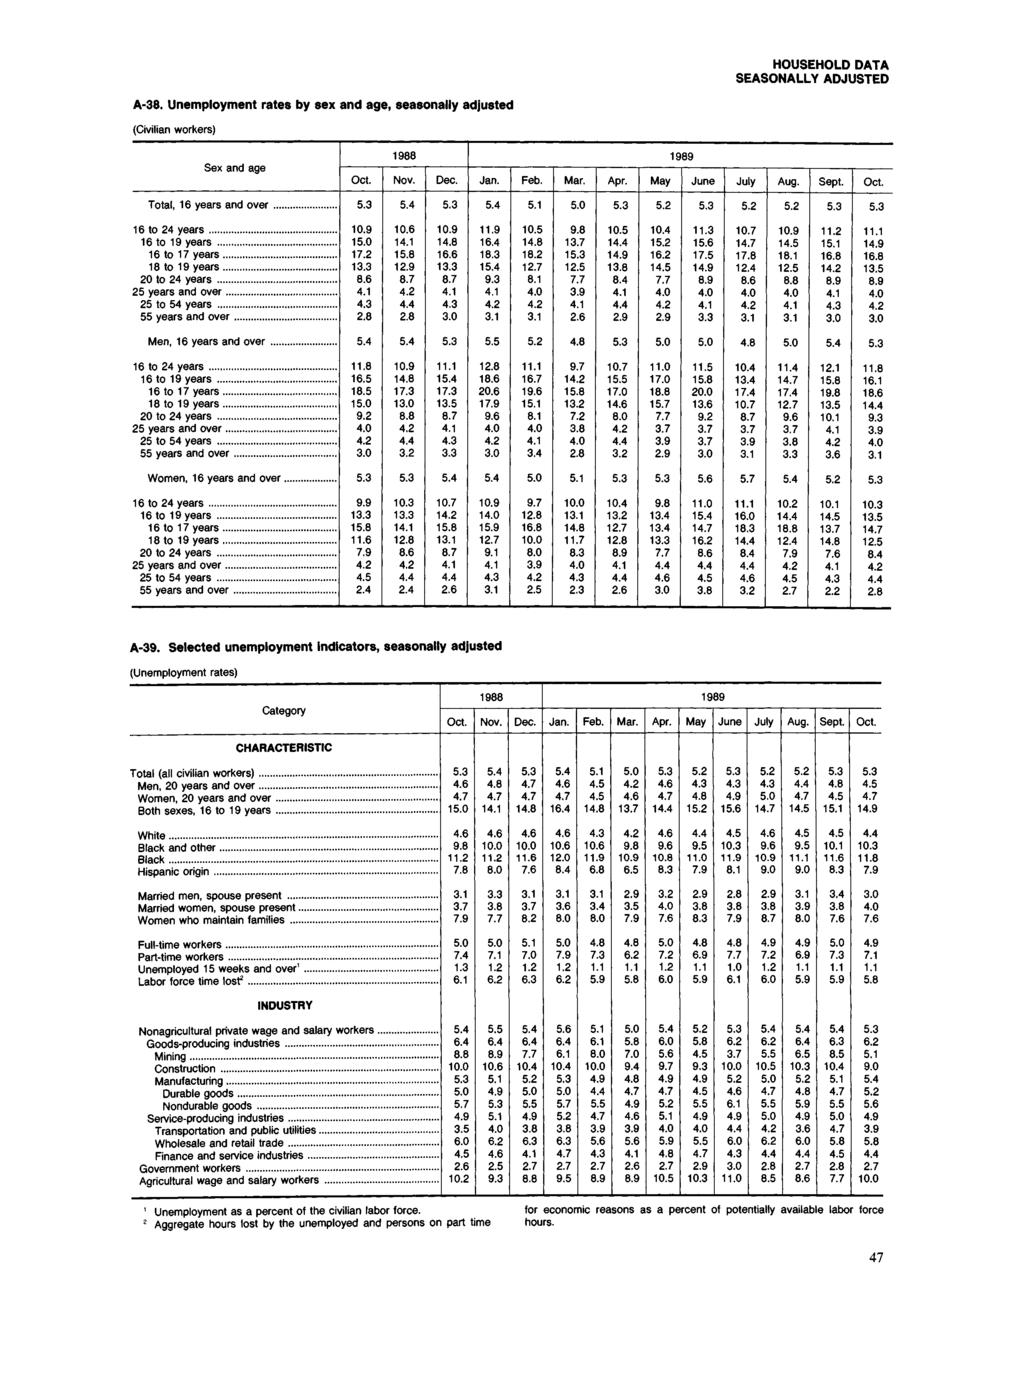 HOUSEHOLD DATA SEASONALLY ADJUSTED A38. Unemployment rates by sex and age, seasonally adjusted (Civilian workers) Sex and age Nov. Dec. Jan. Feb. Mar. Apr. May June July Total, 16 years and over.